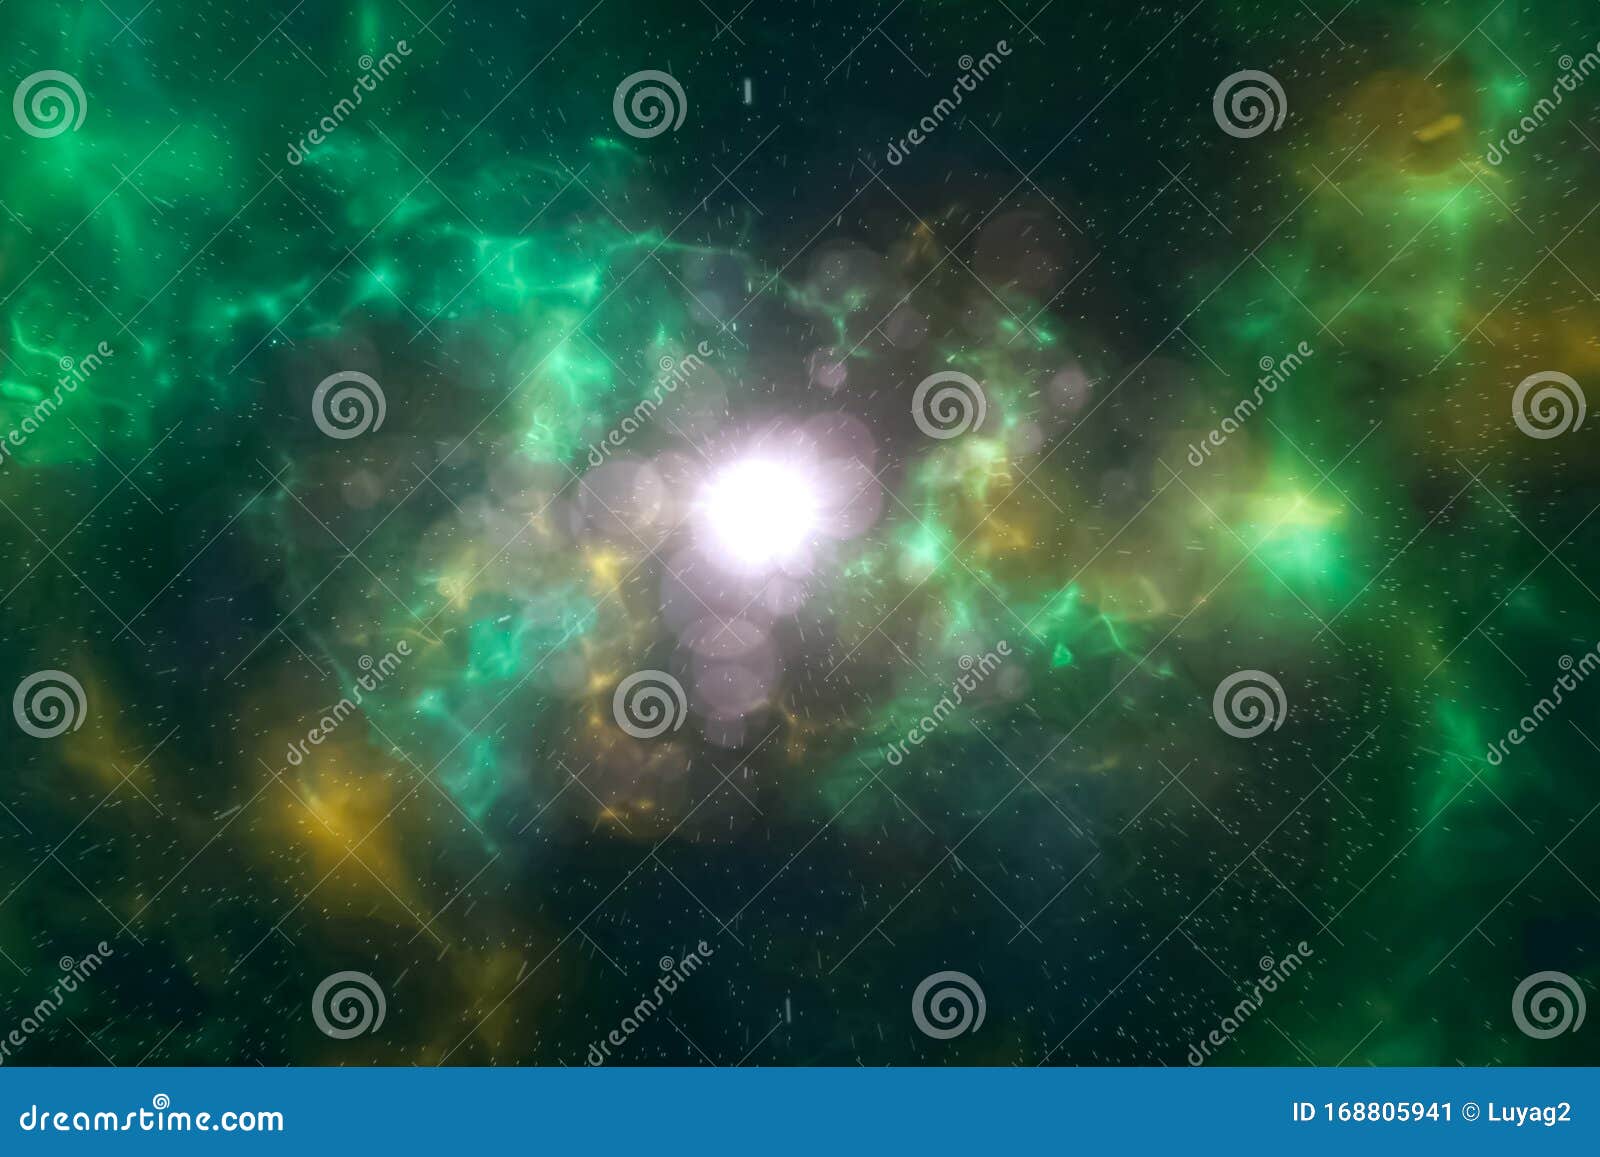 abstraction, supernova explosion, colorful and stars